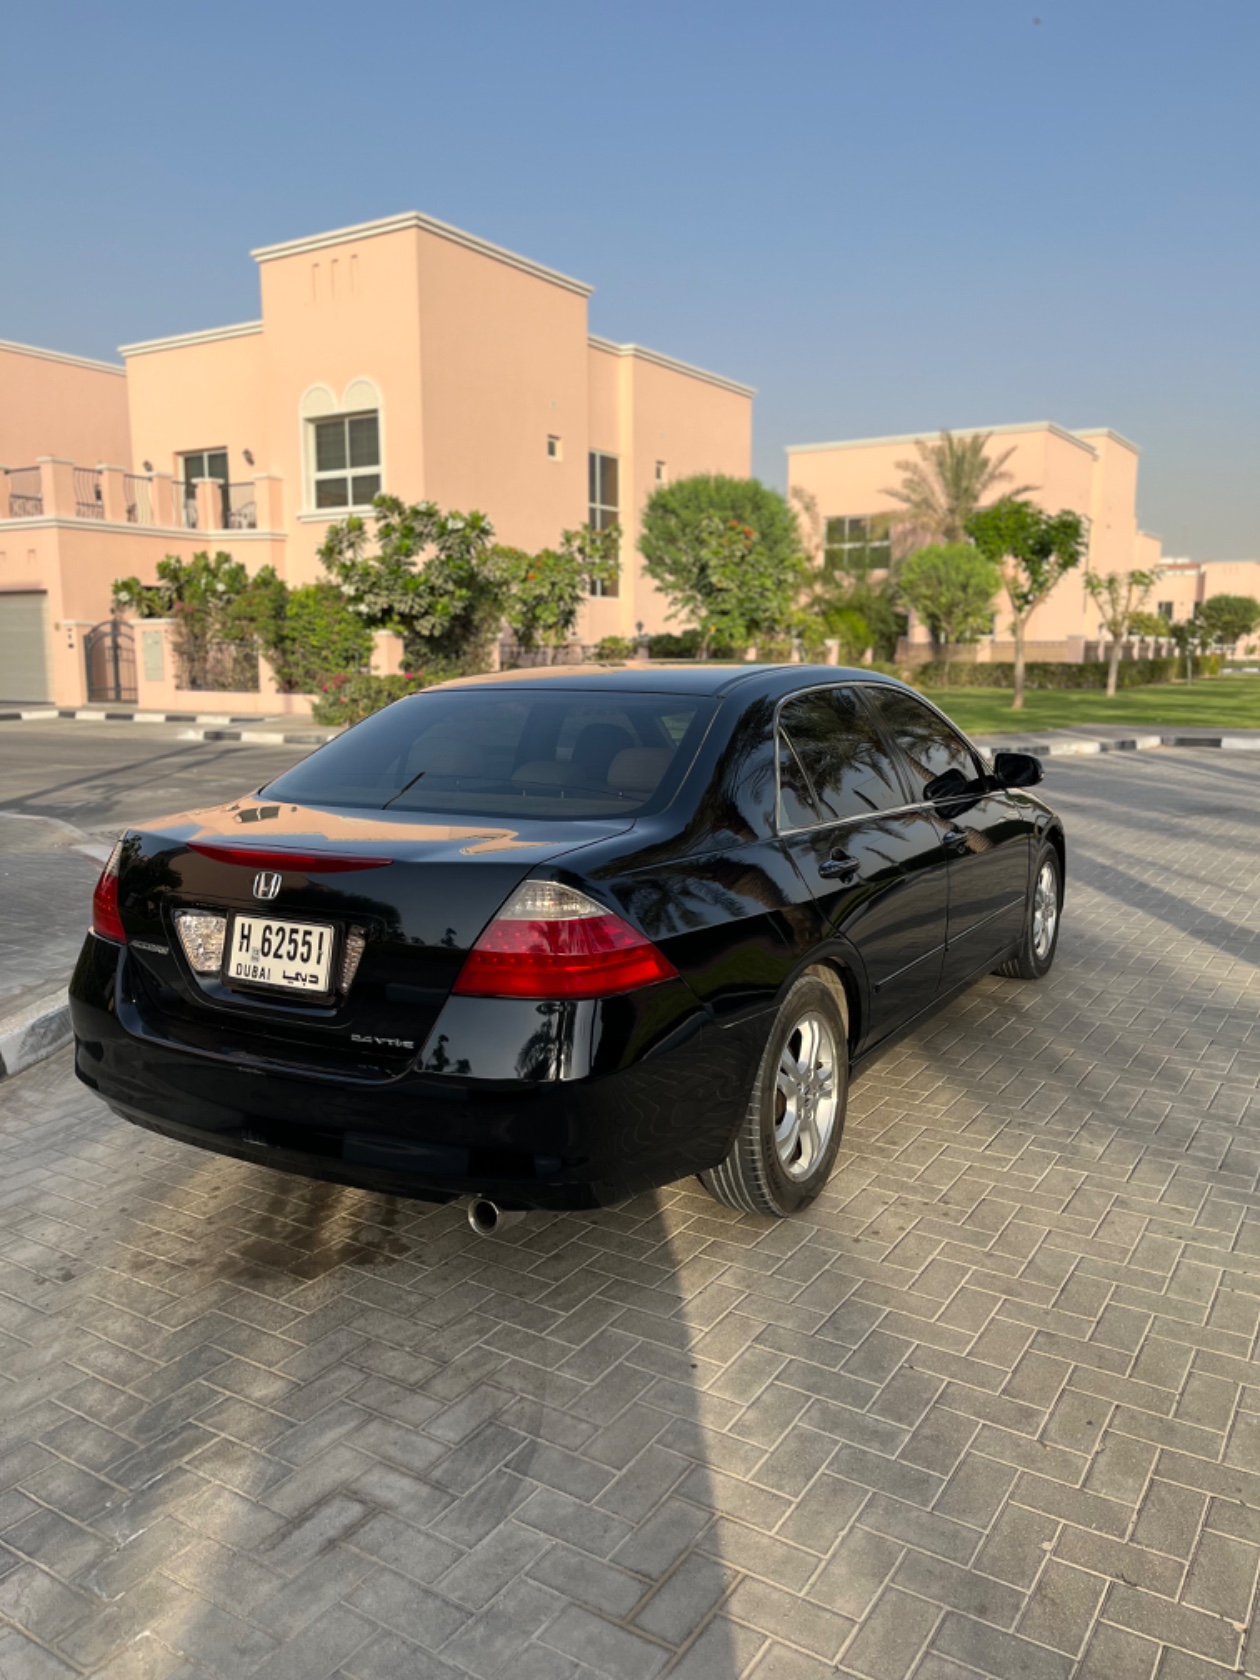 The Advantages of Buying Used 2008 Honda Accord in the UAE